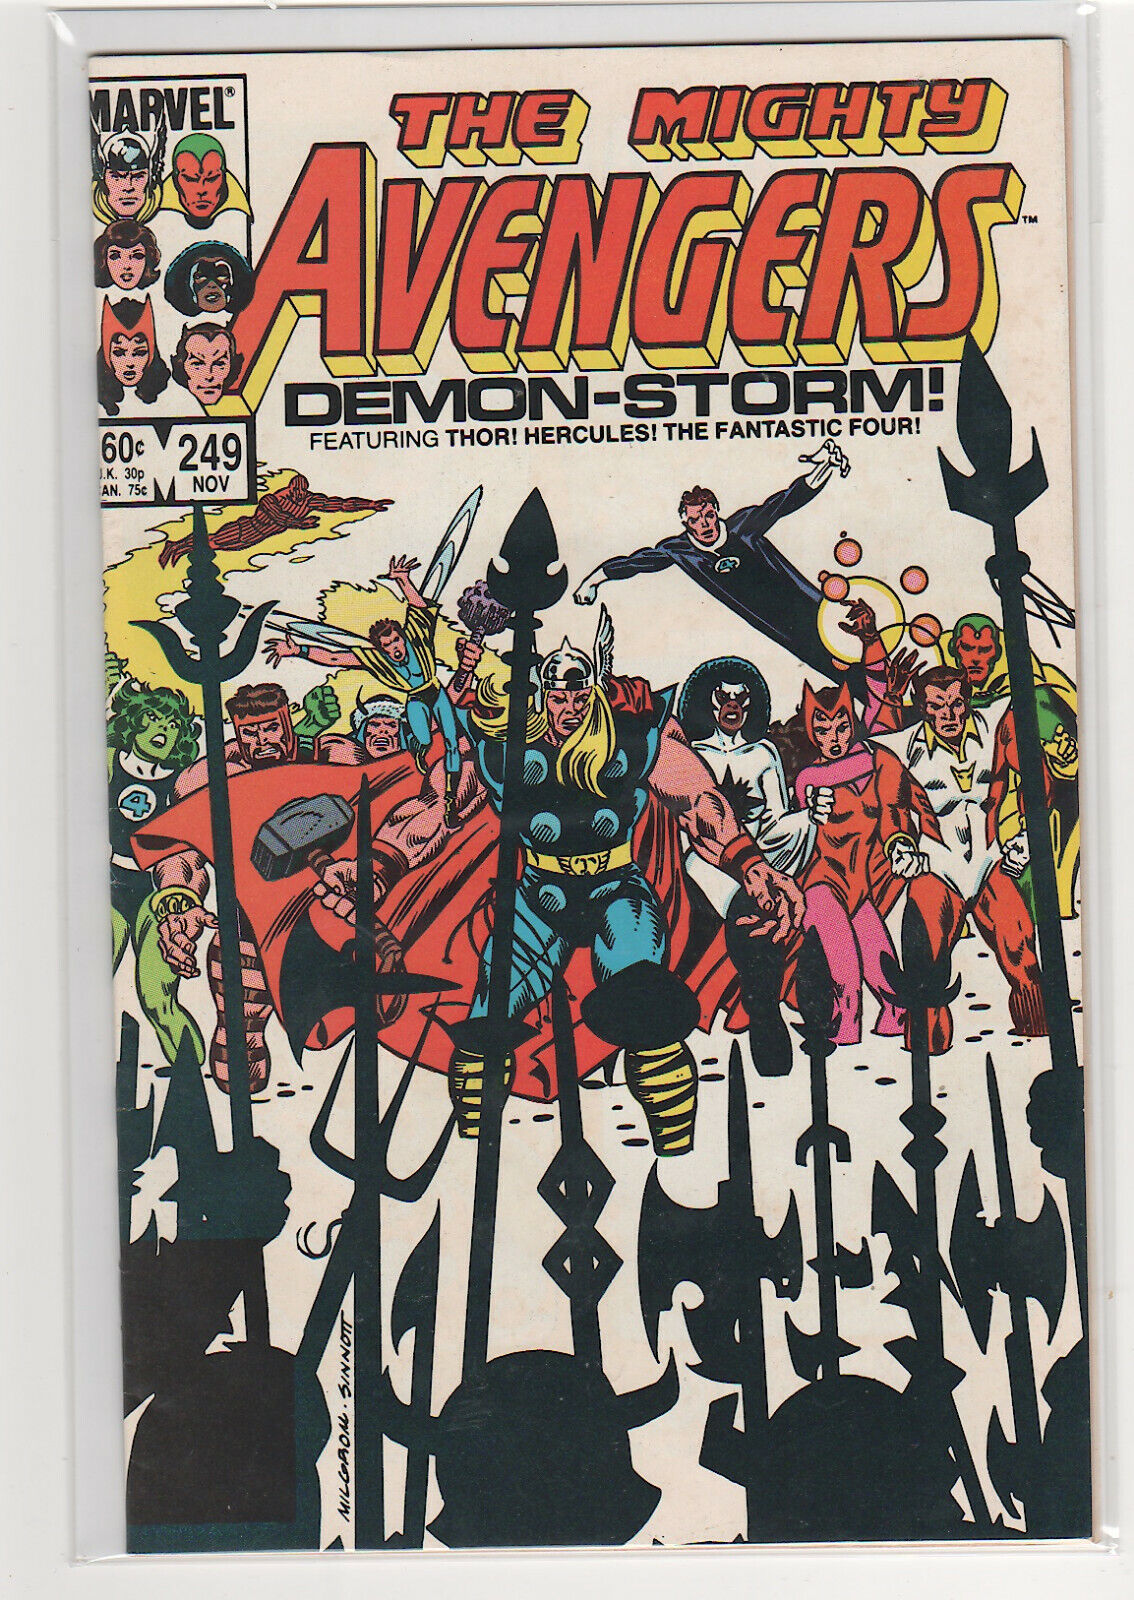 Avengers #249 Thor Scarlet Witch Captain America Vision Hawkeye Iron Man 9.0